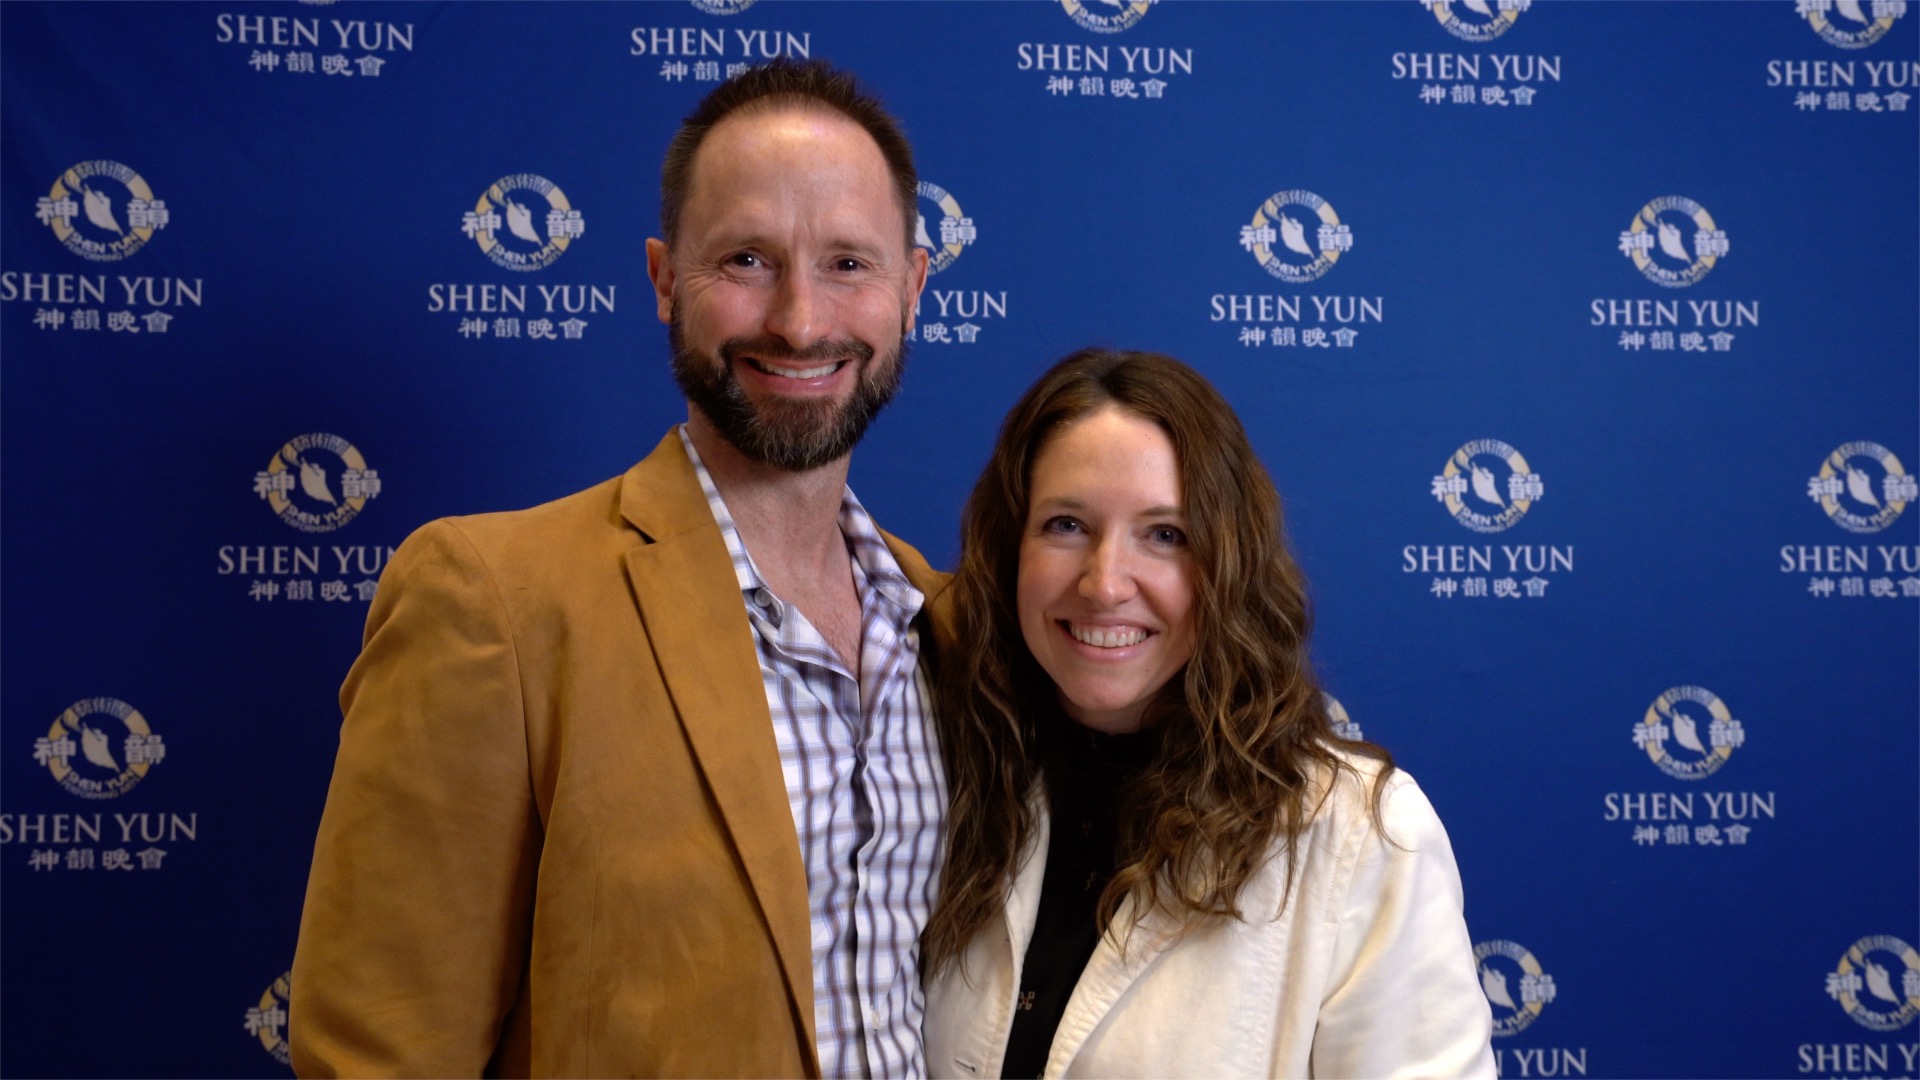 Shen Yun Inspires Salt Lake City Audience to Be Better People